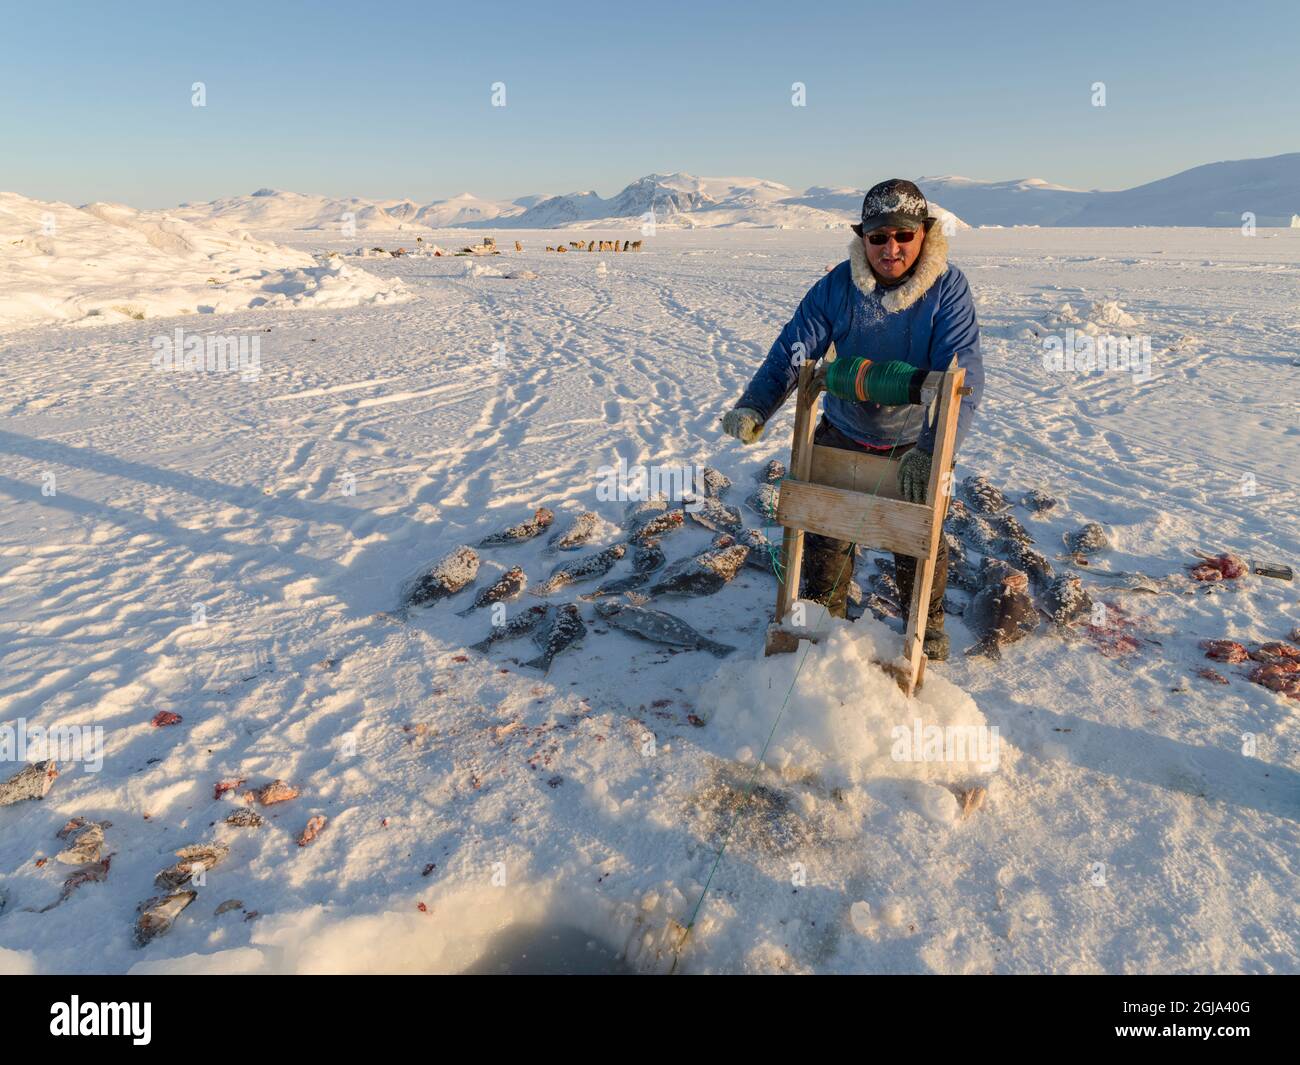 Fisherman with caught halibut on the sea ice of the frozen Melville Bay, near Kullorsuaq, Greenland, Danish territory. (Editorial Use Only) Stock Photo